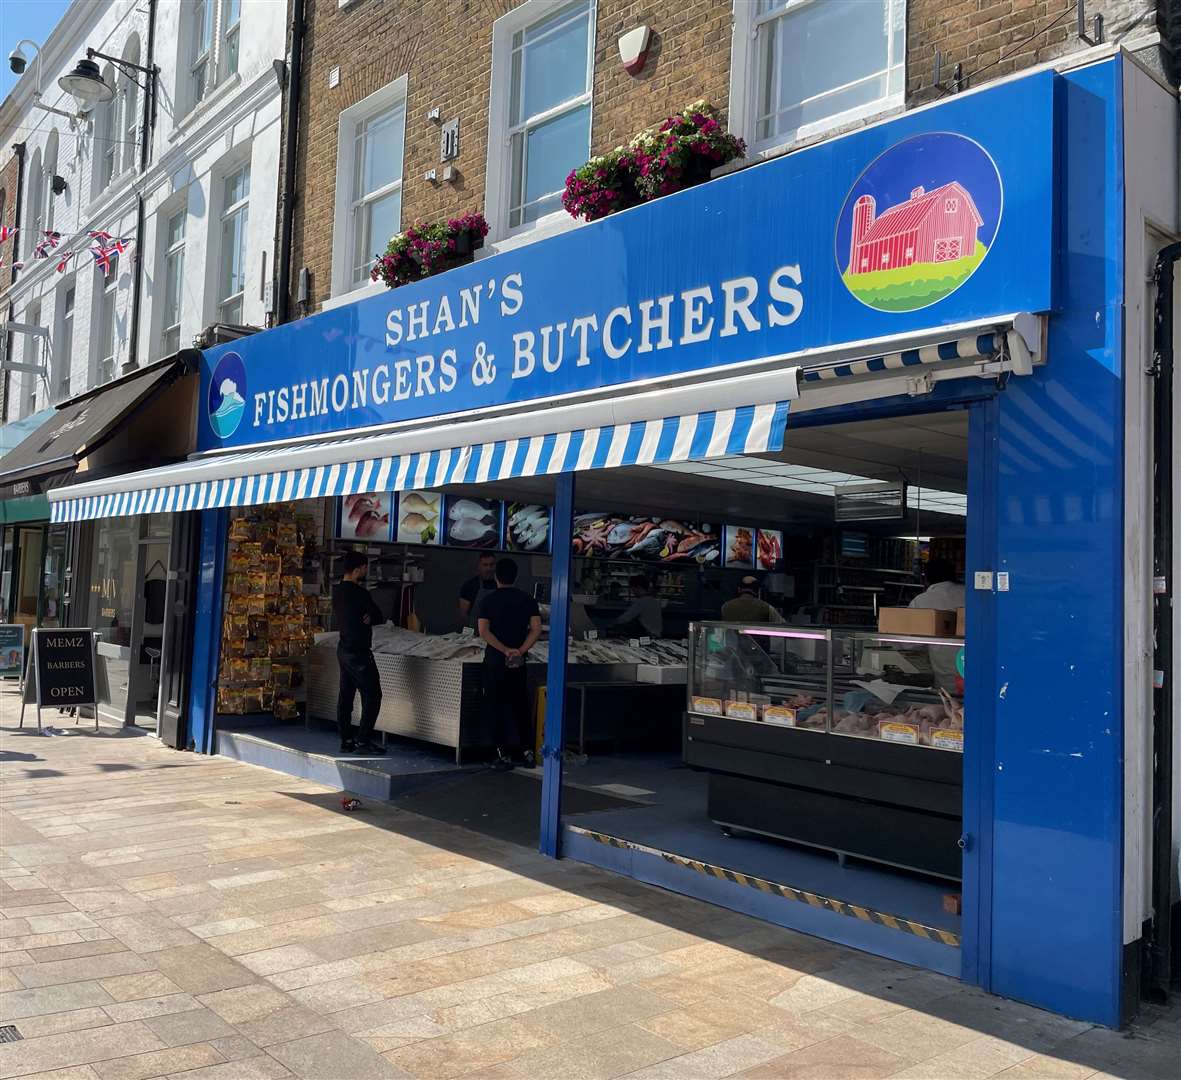 Shan's Fishmonger and Butchers has received a zero food hygiene rating